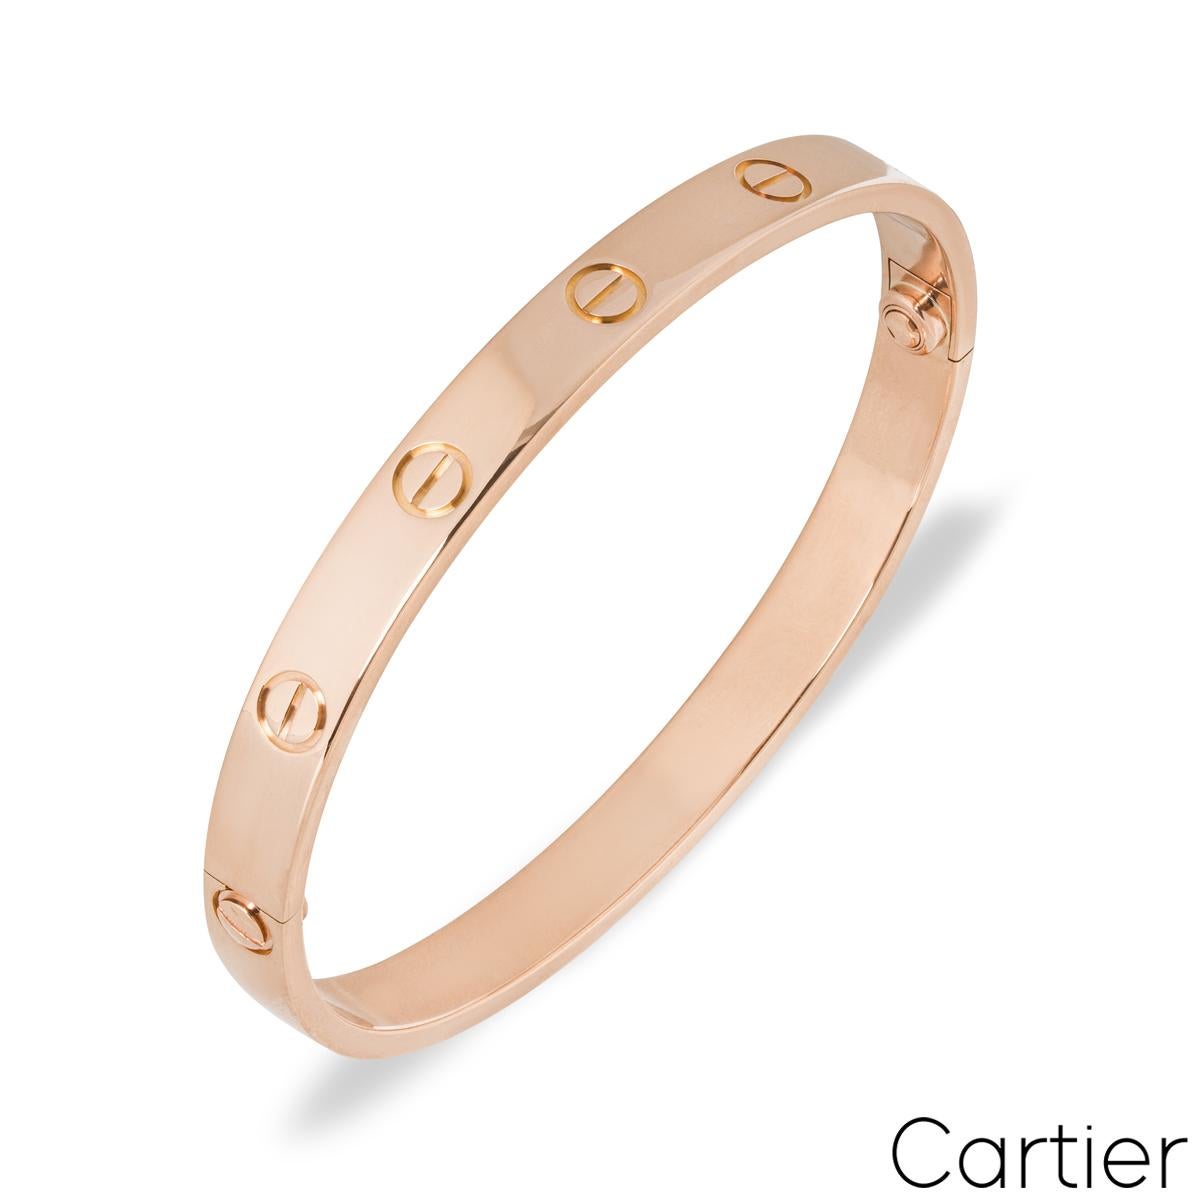 An 18k rose gold Cartier bracelet from the Love collection. The bracelet comprises of the iconic screw motifs around the outer edge. The bracelet is a size 20 and features the new style screw system with a gross weight of 34.20 grams.

The bracelet